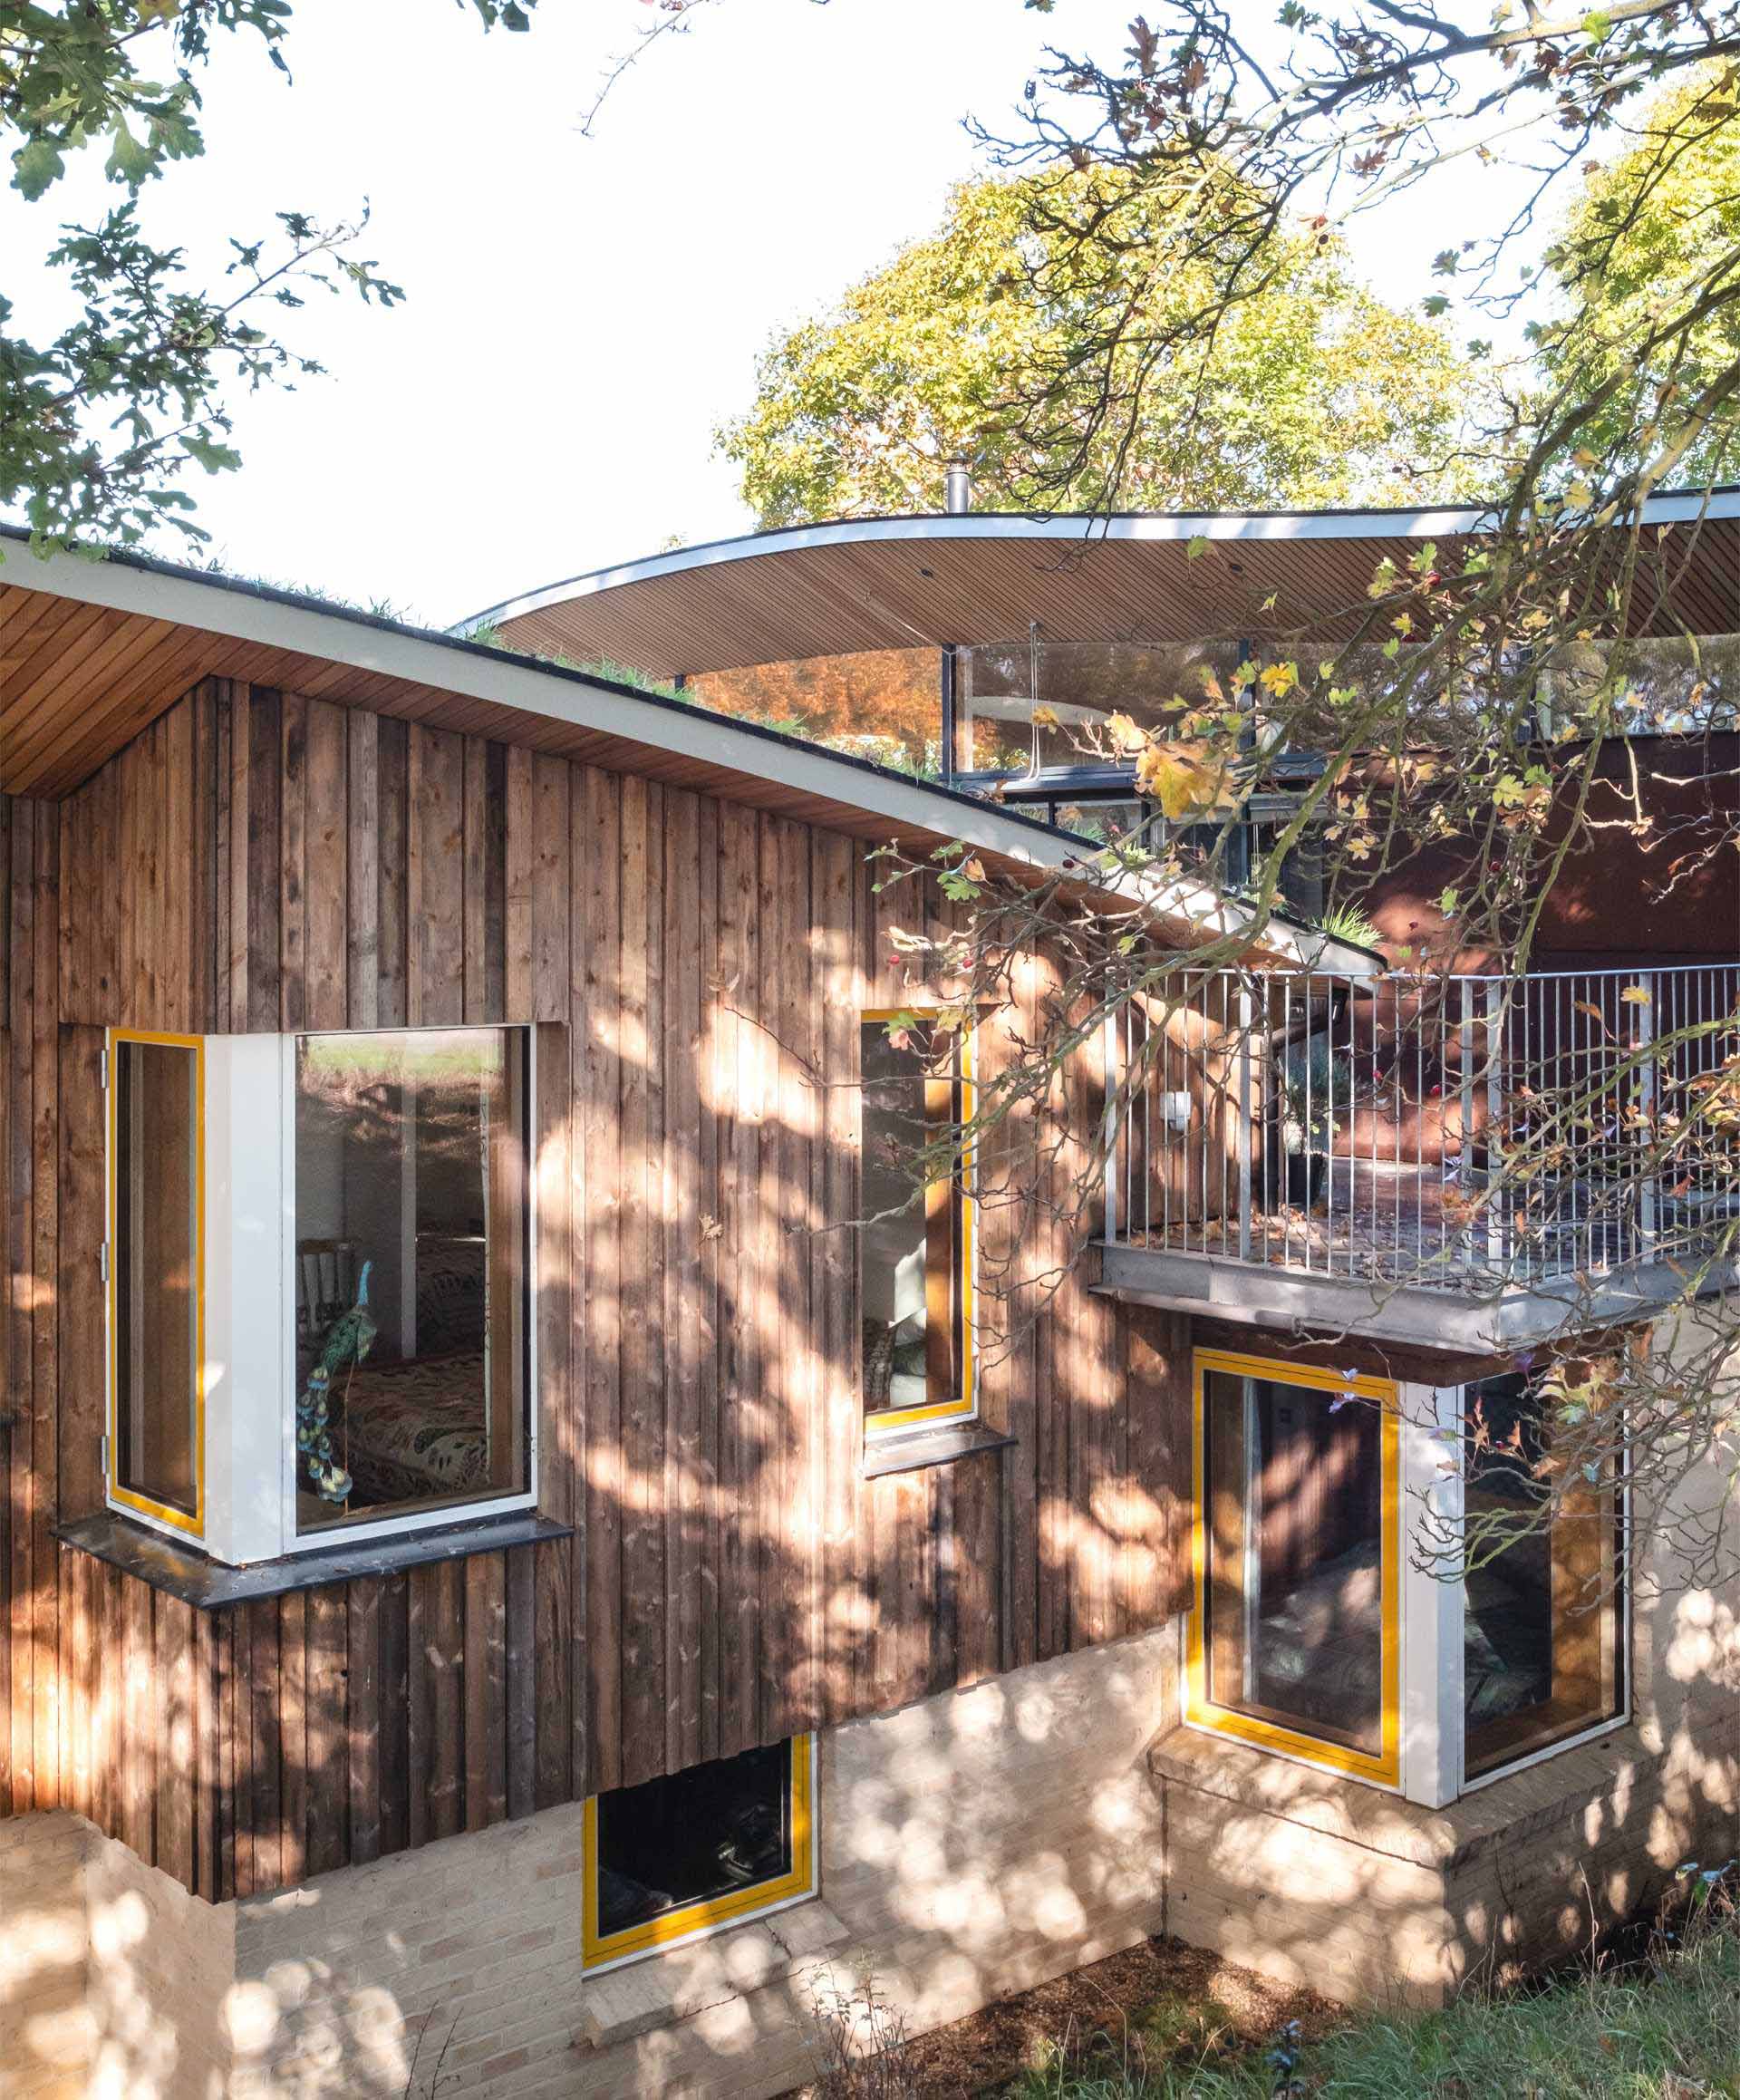 A modern cabin with overhanging wood-lined eaves and curved green roofs.